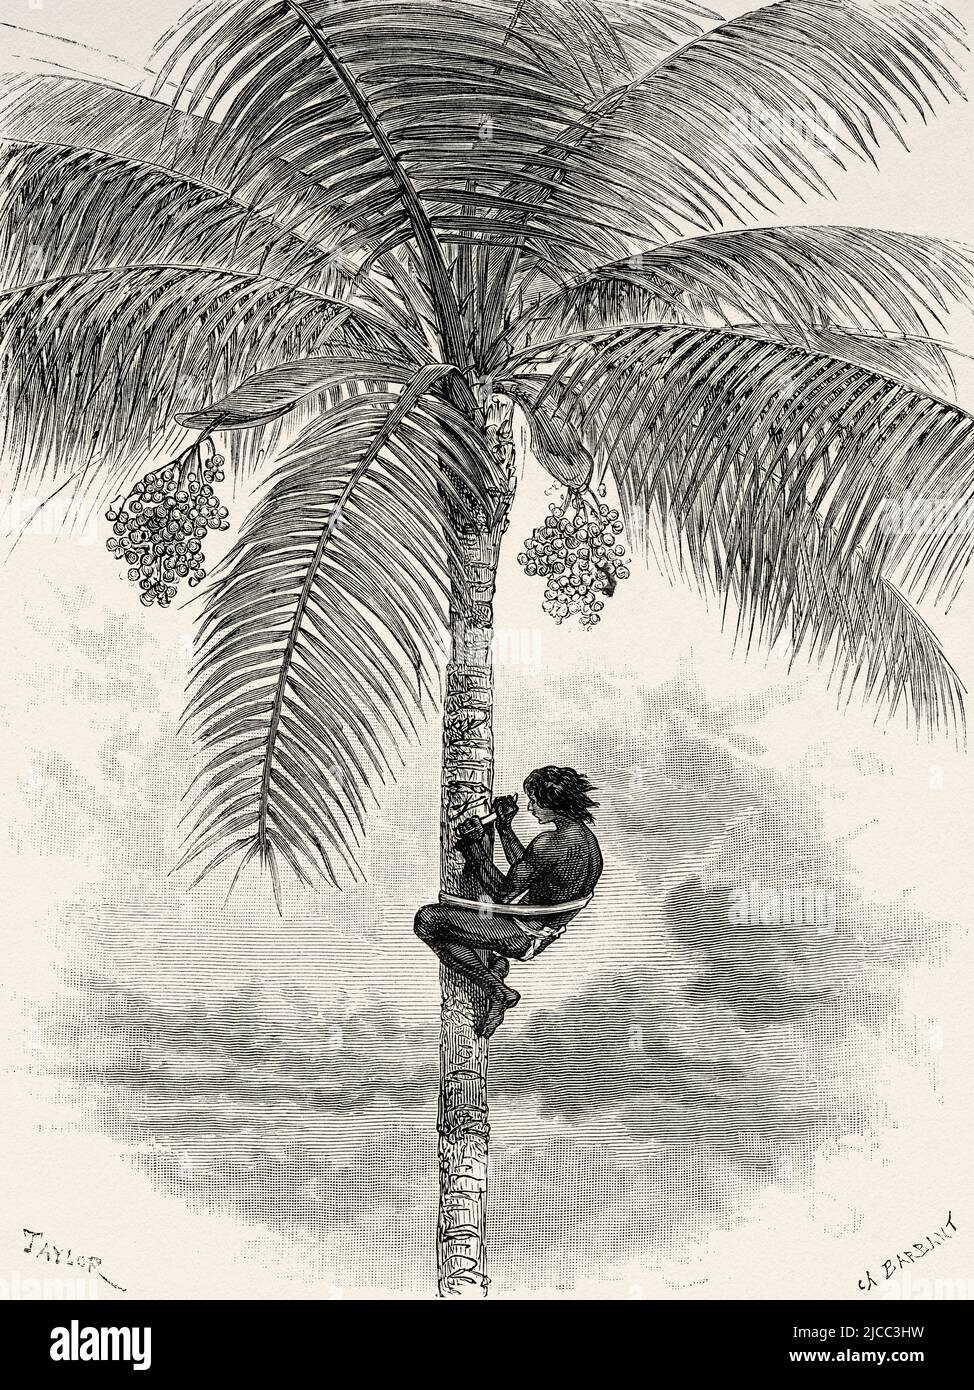 Ceroxylon quindiuense. The wax harvest of the Quindío wax palm, forests of the Andes in Colombia. South America. Journey through Equinoctial America 1875-1876 by Edward Francois Andre. Le Tour du Monde 1879 Stock Photo